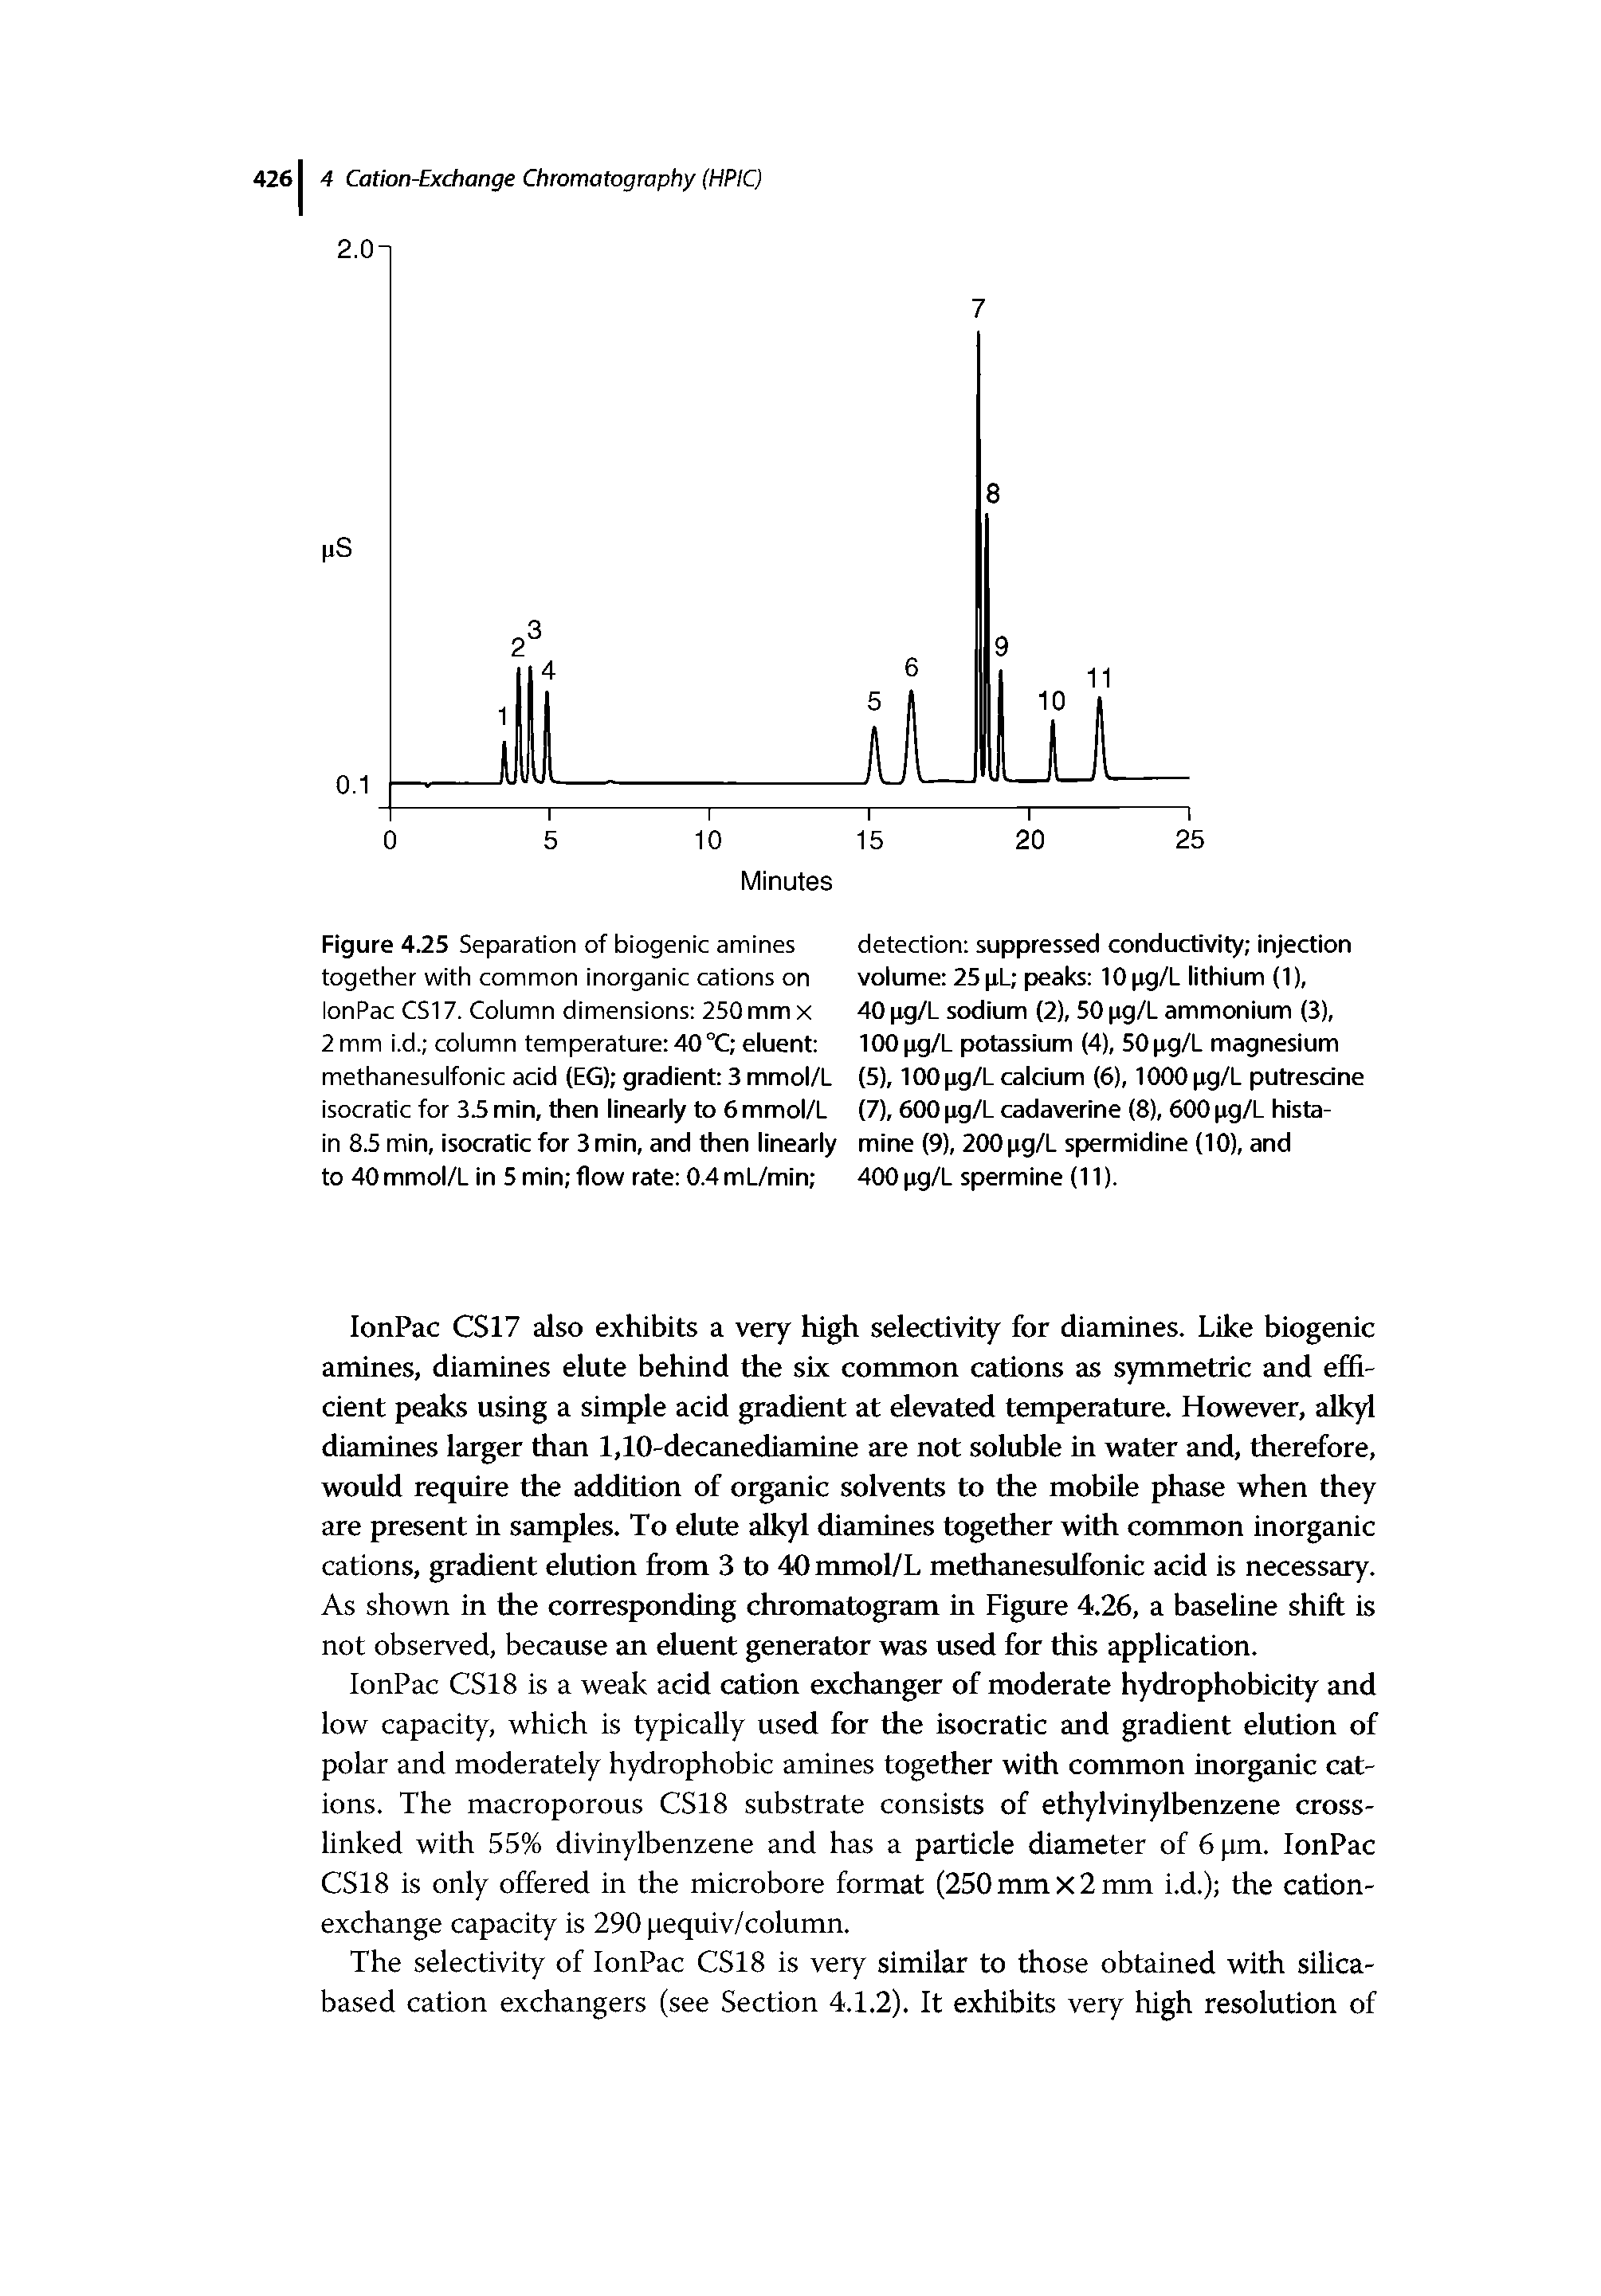 Figure 4.25 Separation of biogenic amines together with common inorganic cations on lonPac CS17. Column dimensions 250 mm x 2 mm i.d. column temperature 40°C eluent methanesulfonic acid (EG) gradient 3 mmol/L isocratic for 33 min, then linearly to 6 mmol/L in 8.5 min, isocratic for 3 min, and then linearly to 40mmol/L in 5 min flow rate 0.4mL/min ...